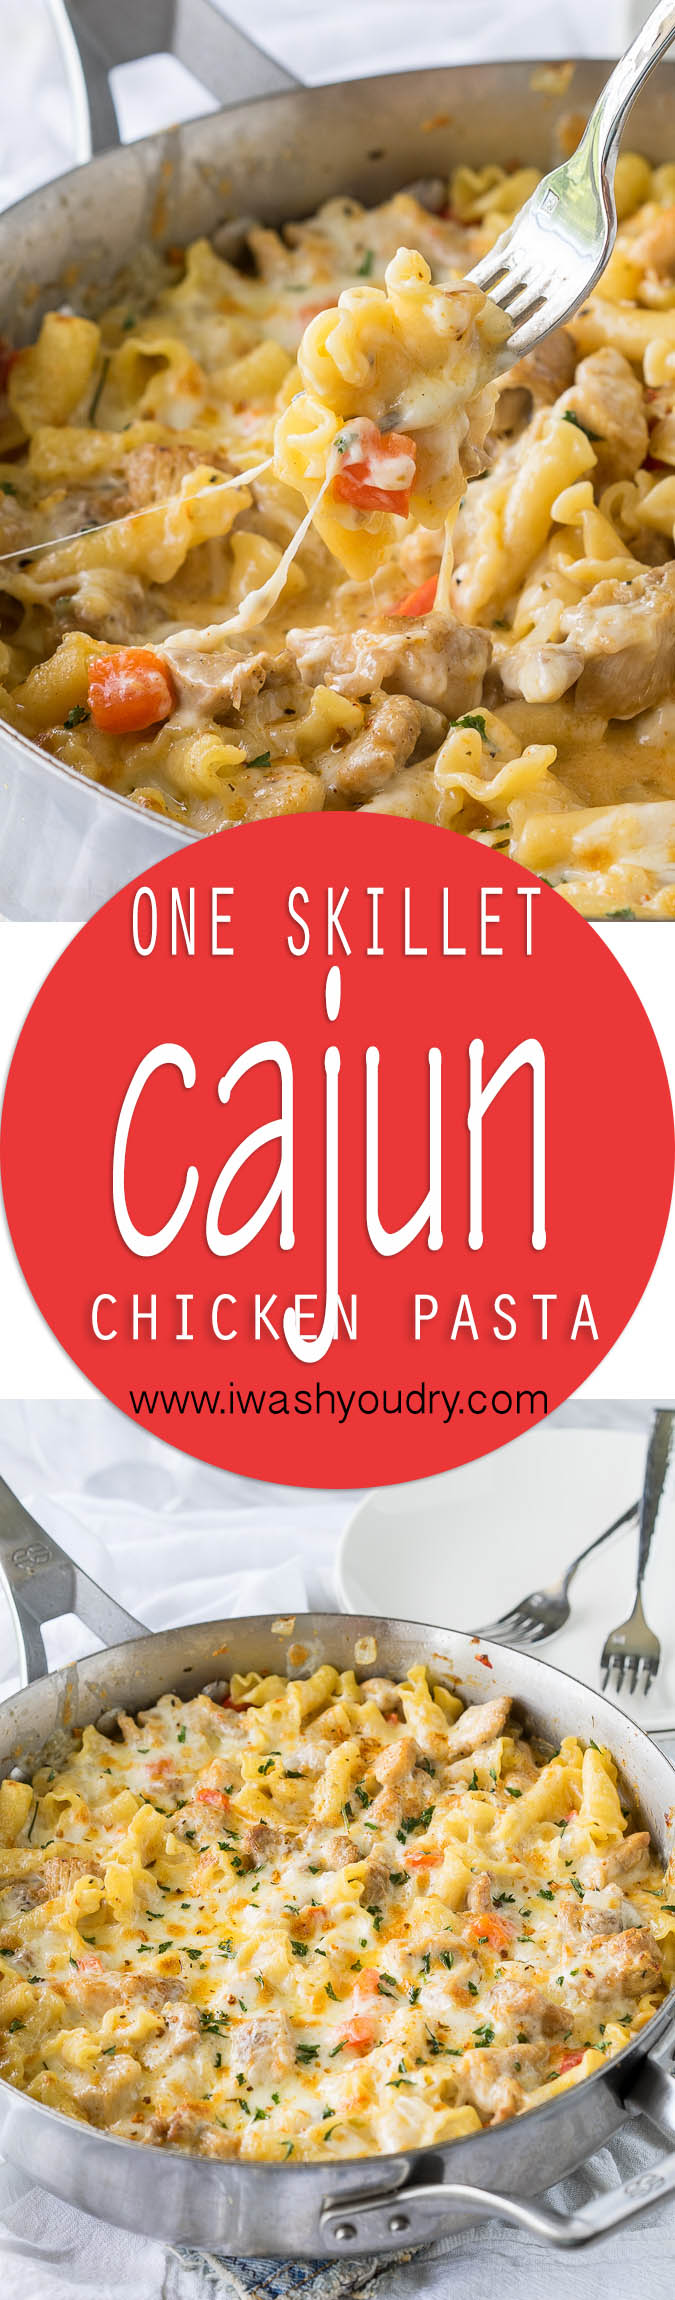 This Cajun Chicken Pasta Skillet is creamy, cheesy and slightly spicy ! This easy dinner recipe is made in just one skillet too!